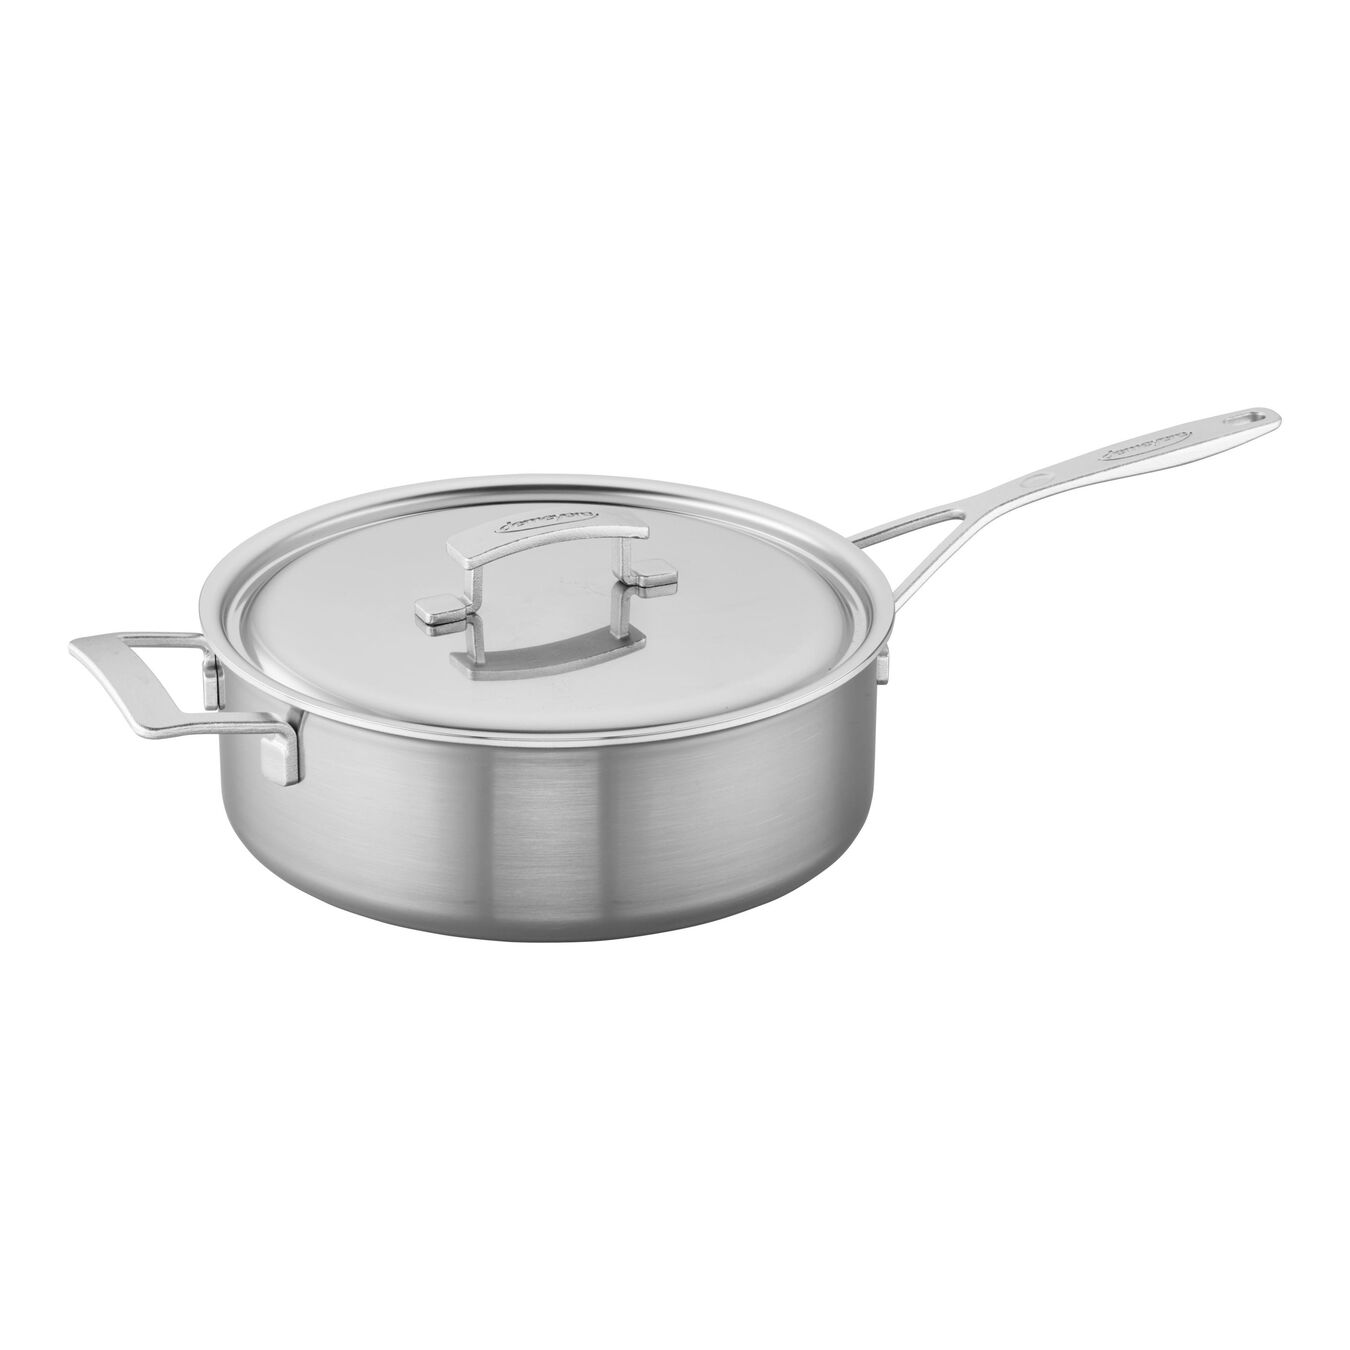 6.5 qt Sauté Pan with Helper Handle and Lid, 18/10 Stainless Steel ,,large 1